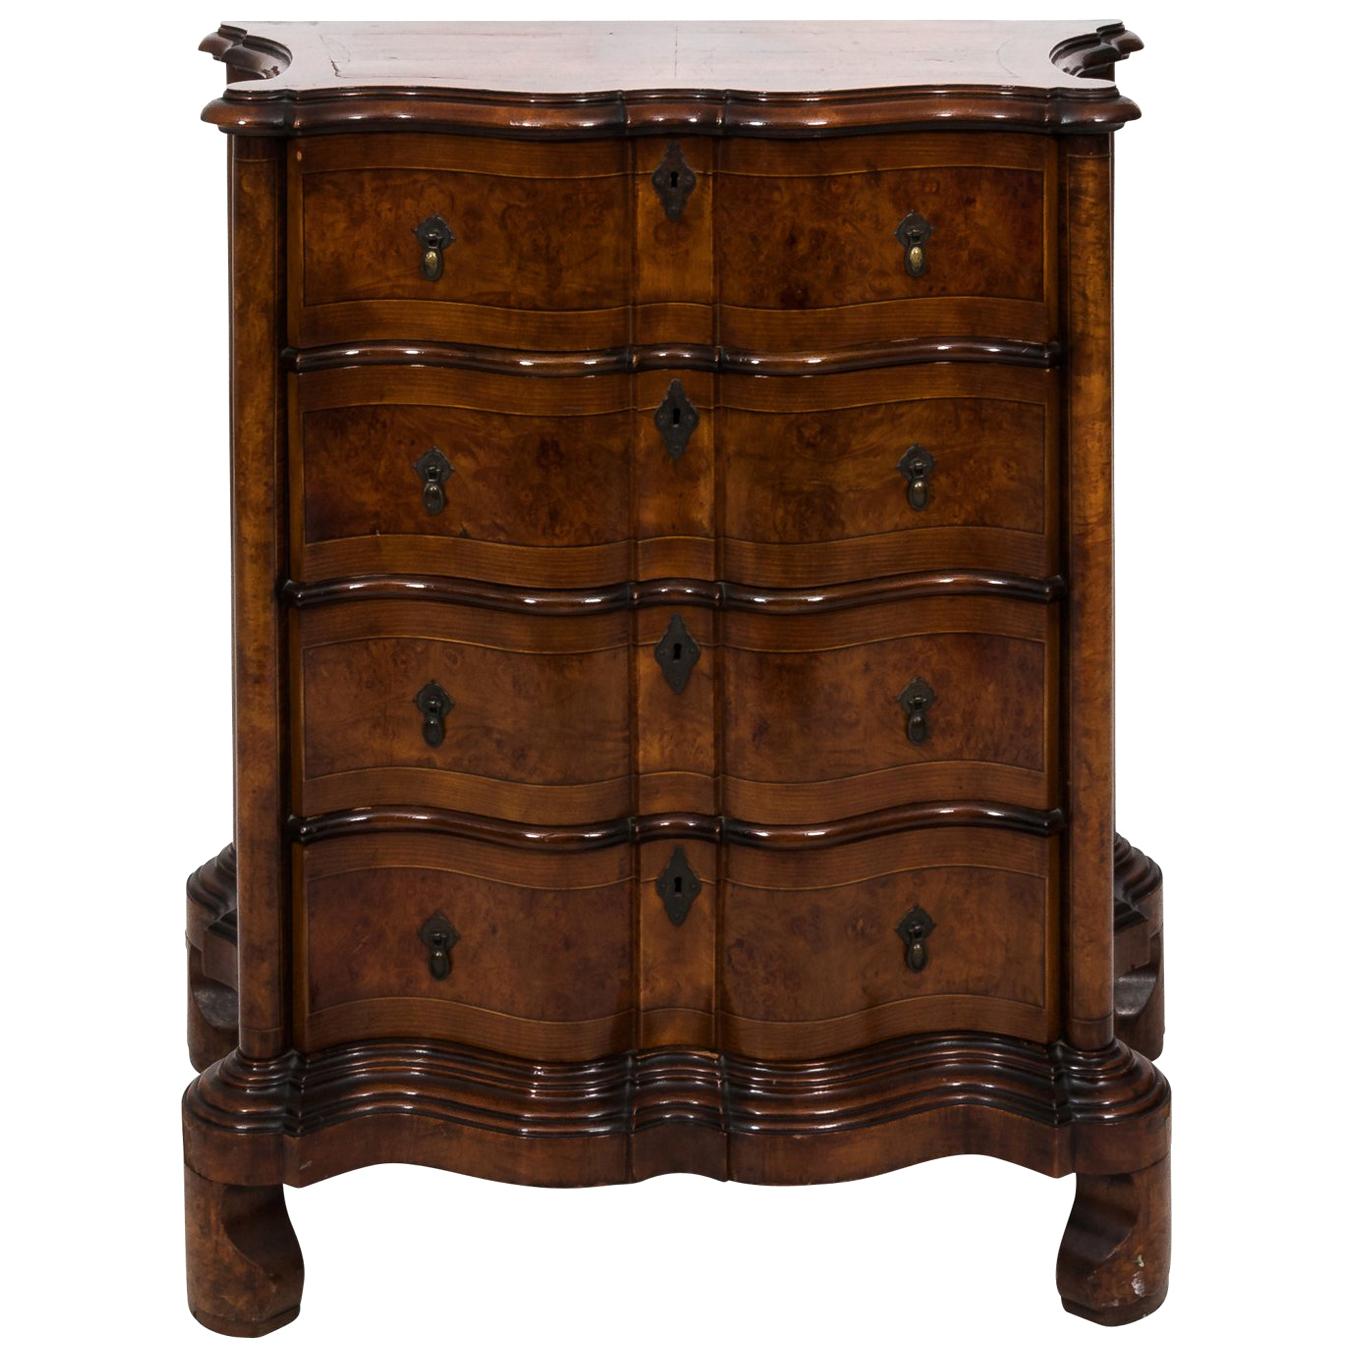 Early 20th Century Georgian Style Serpentine Chest of Drawers